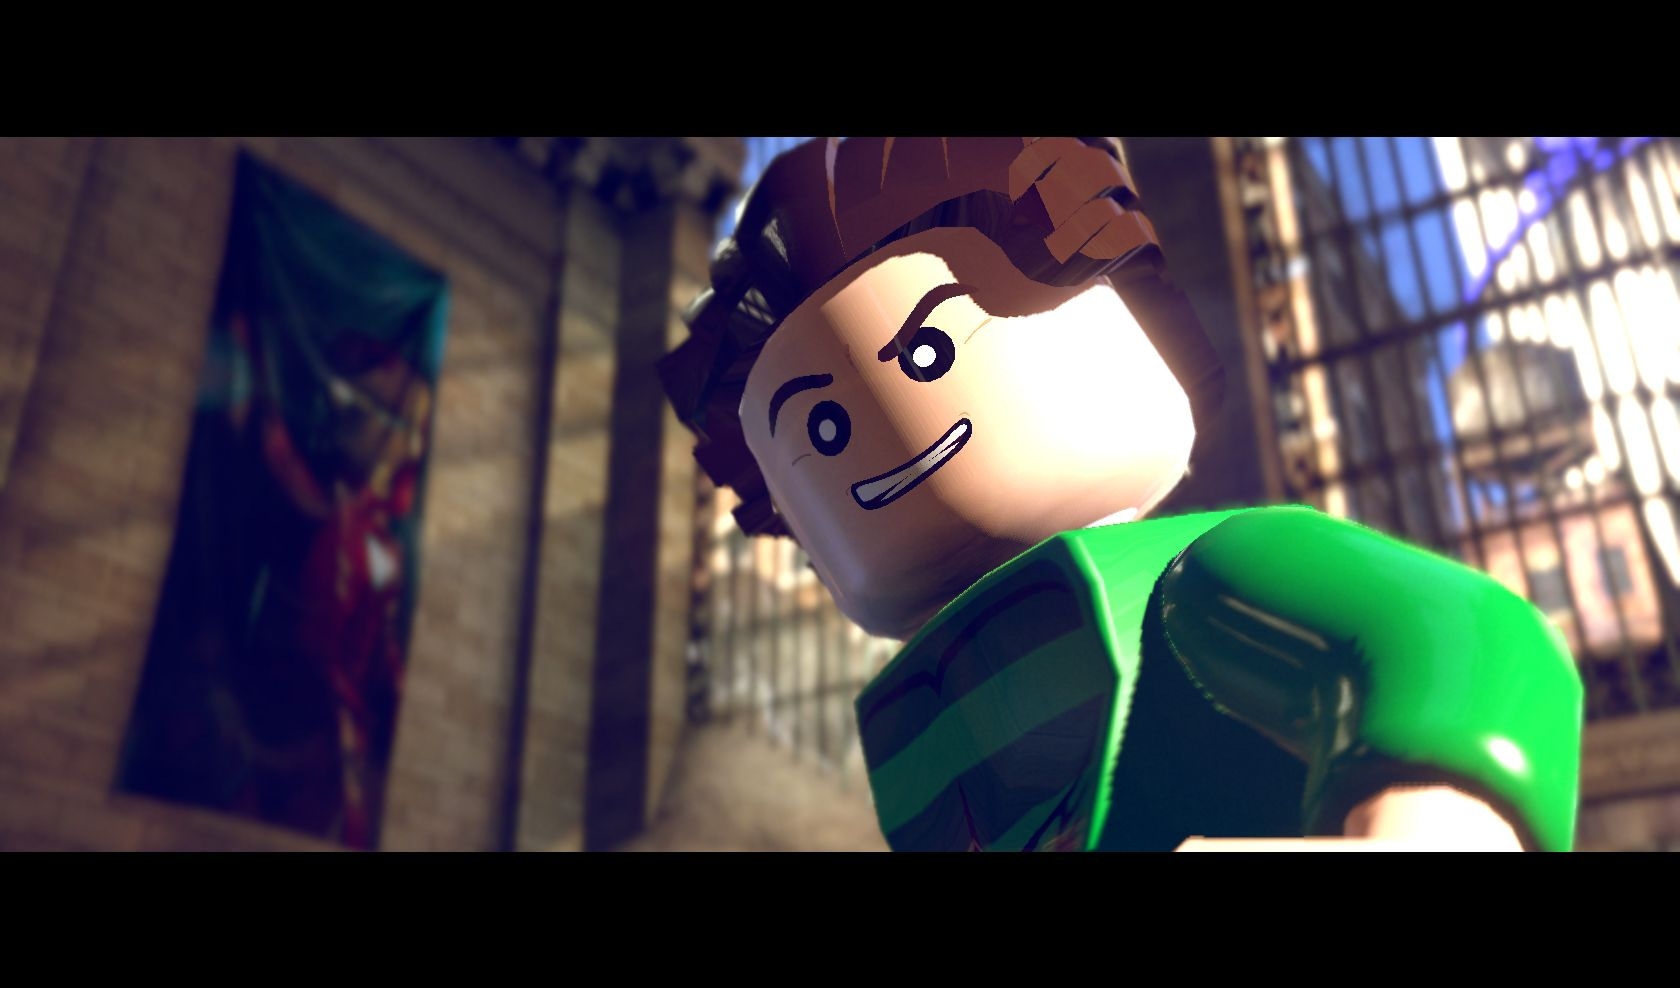 This Lego Marvel Super Heroes Wallpaper Is Available In